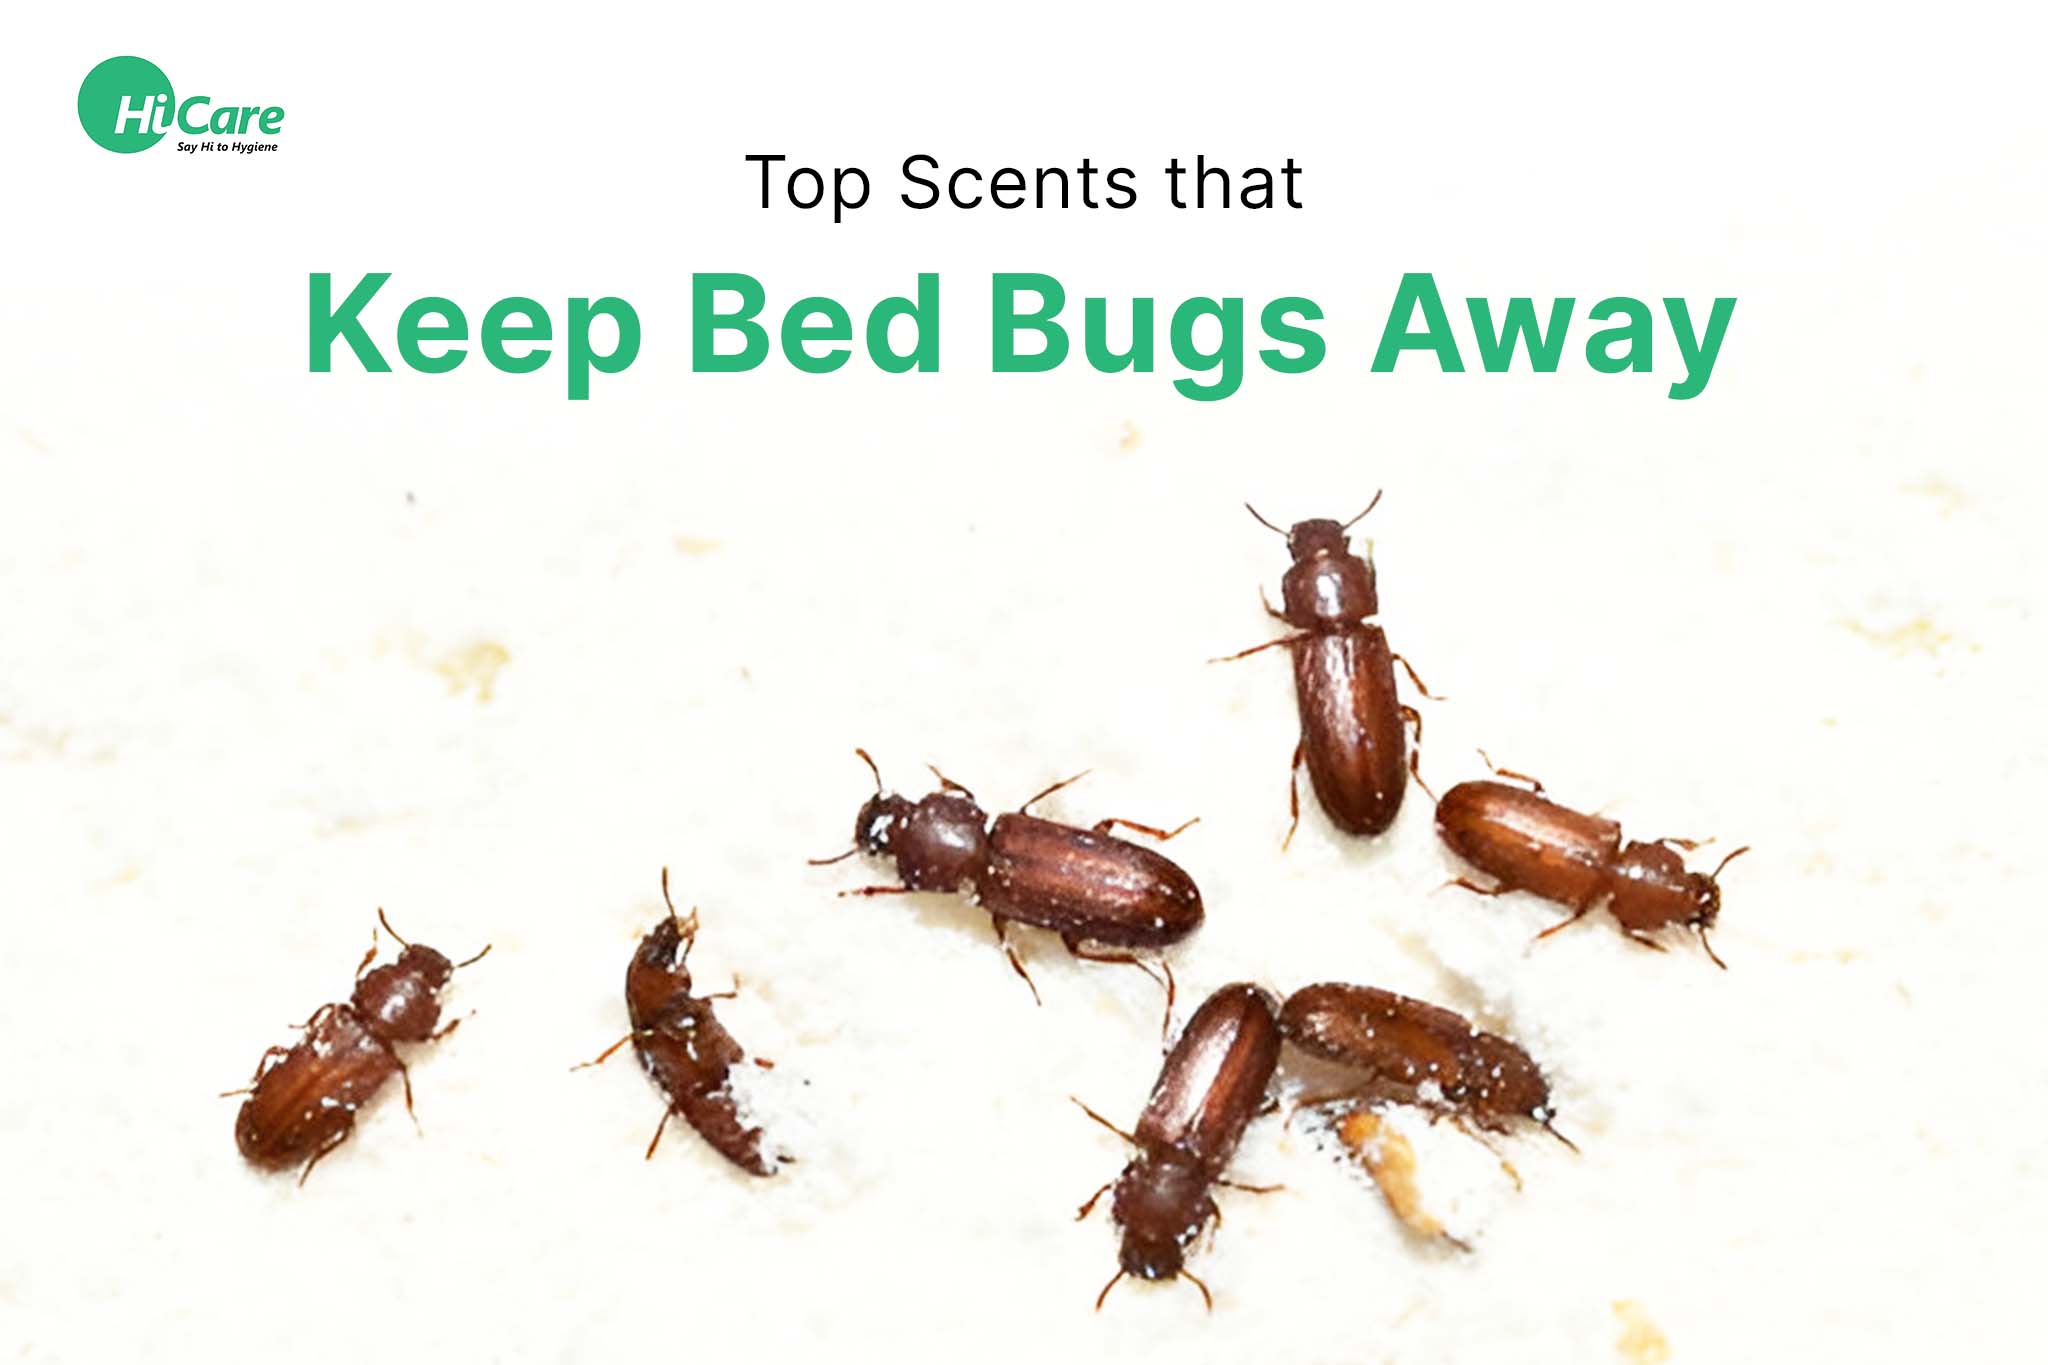 Top 10 Scents that Keep Bed Bugs Away